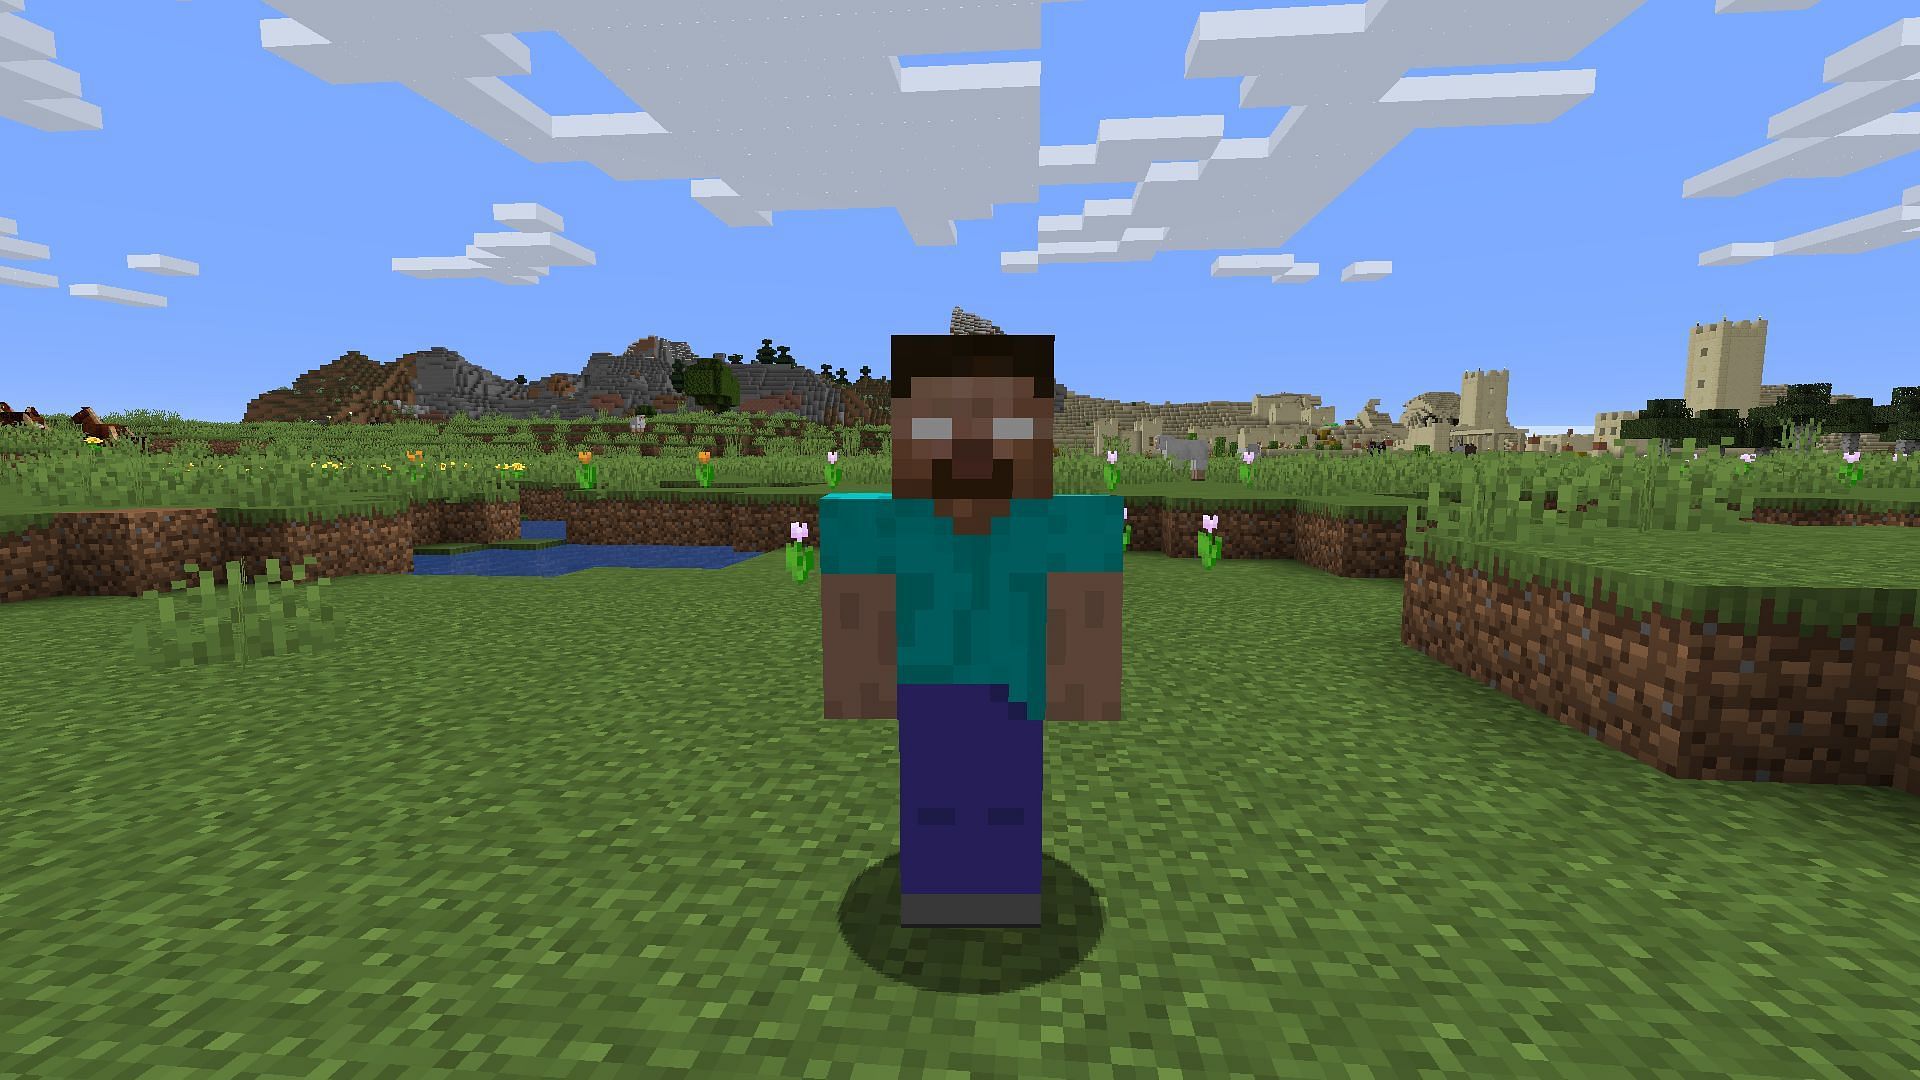 Herobrine mod adds the famous mythical character, along with various other features in Minecraft (Image via CurseForge)